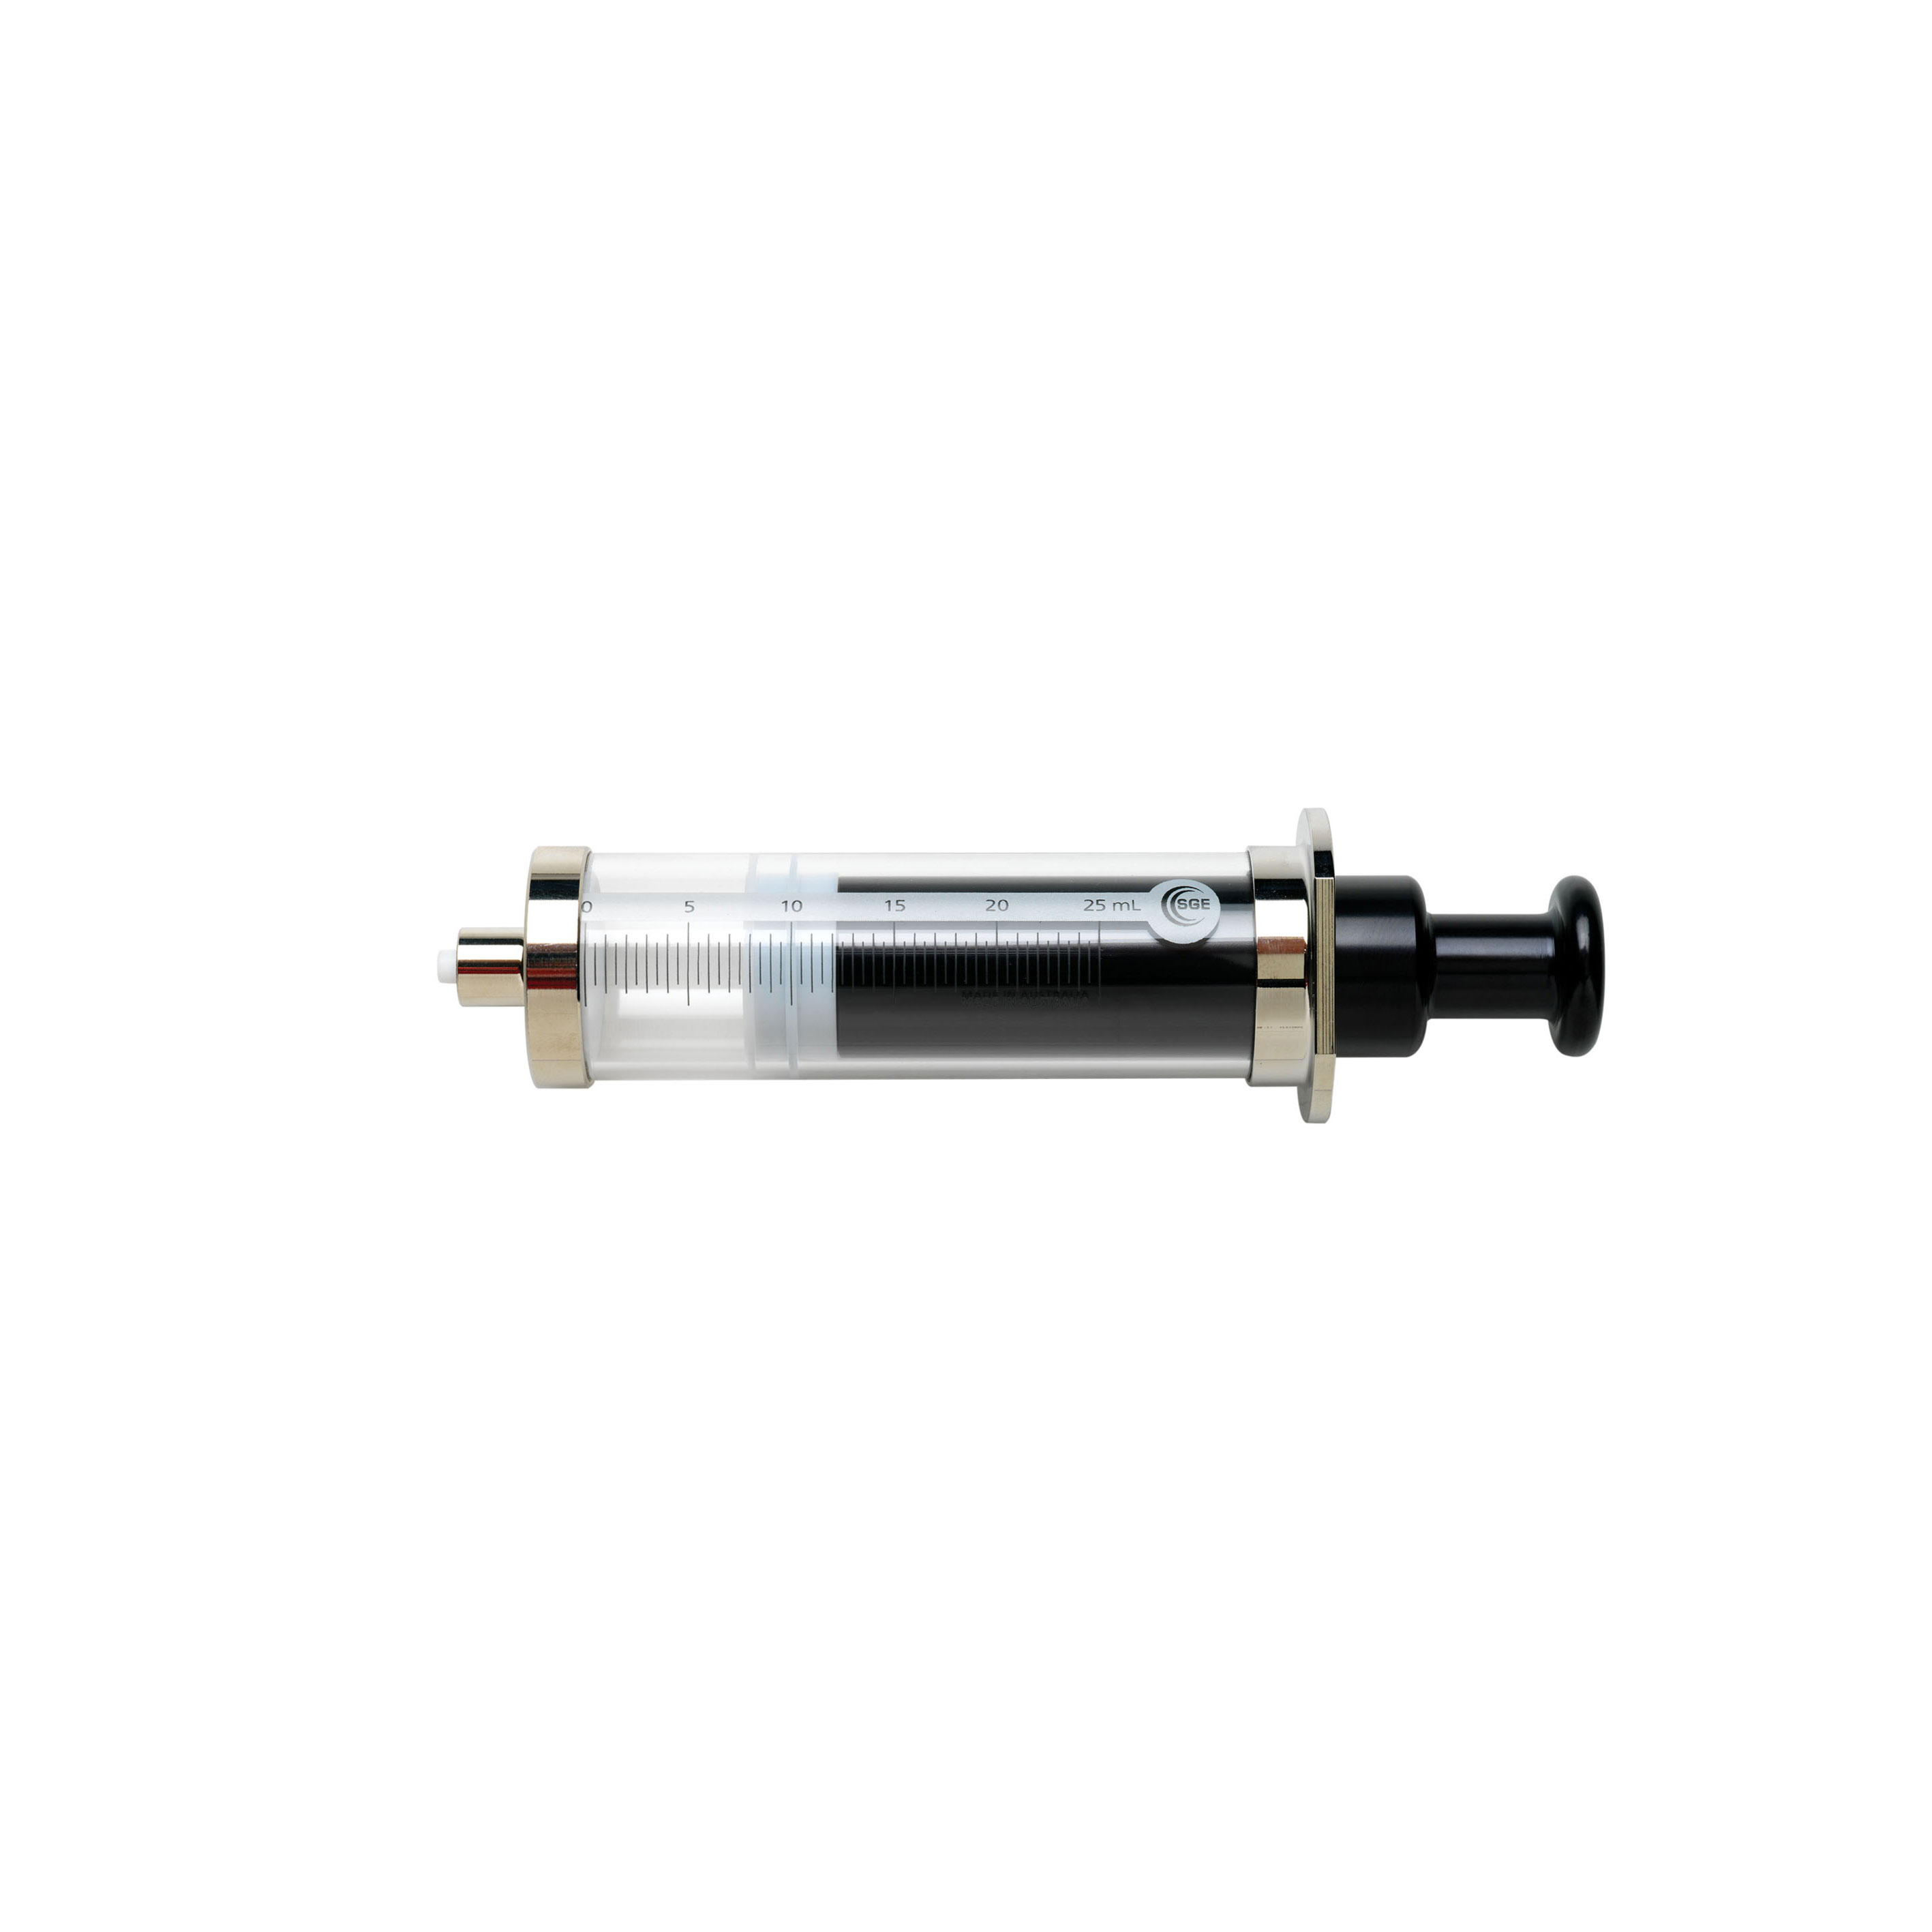 Jeringas Gas Tight desde 1ml a 100ml